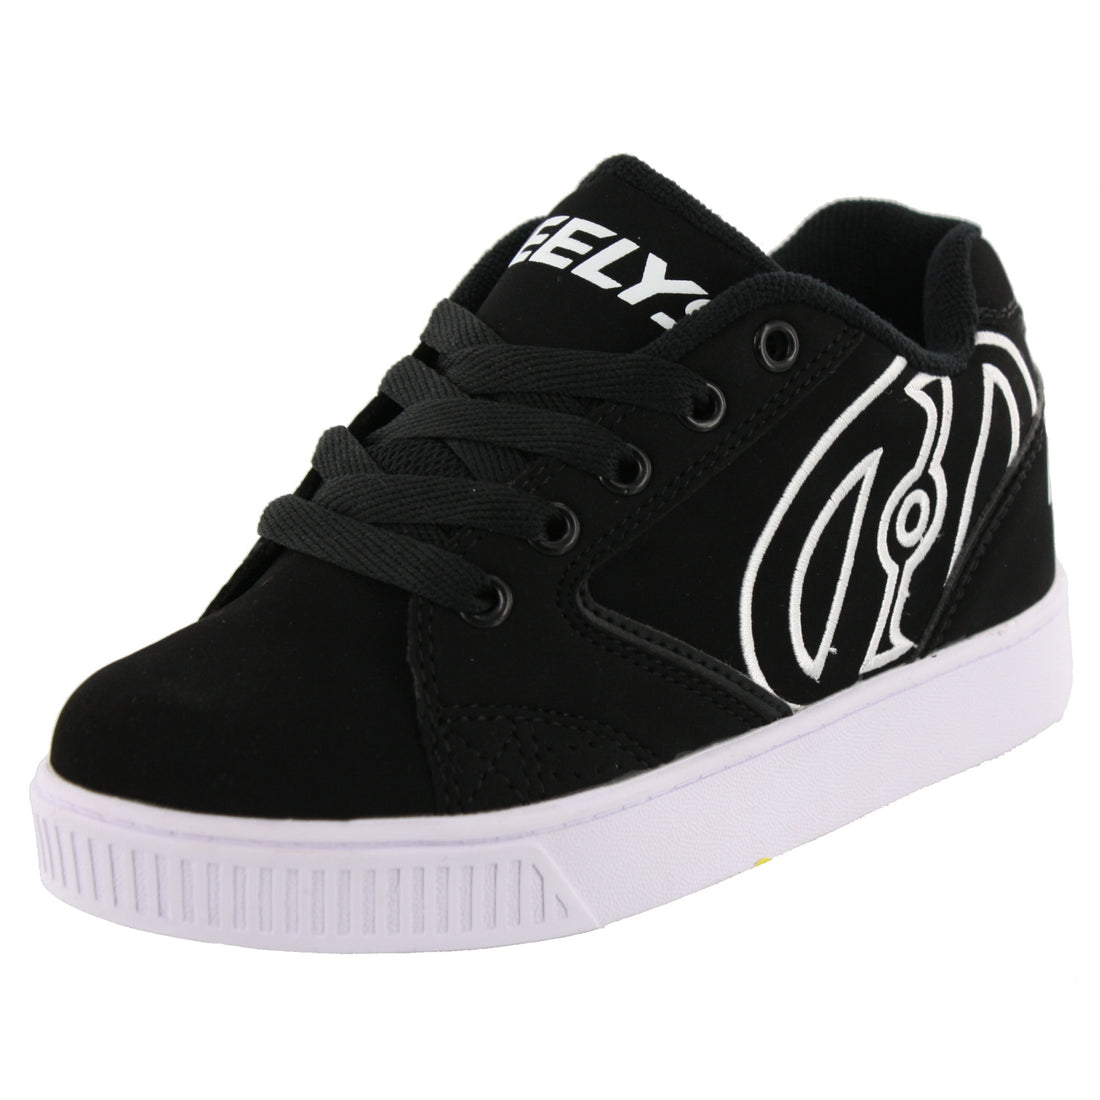 Heelys Skate Shoes with Wheels Online | Shoe City